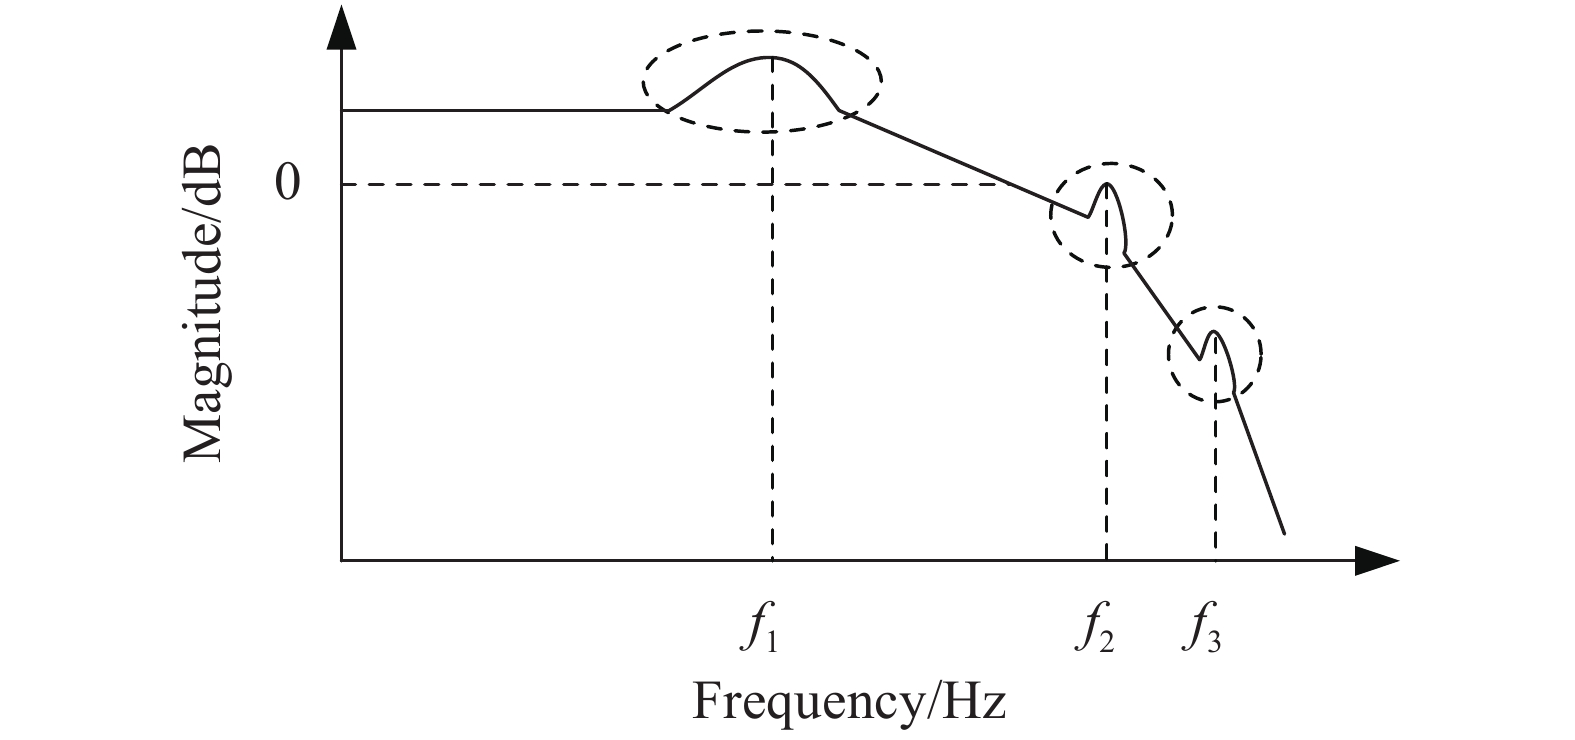 Schematic diagram of structure resonant frequency of FSM